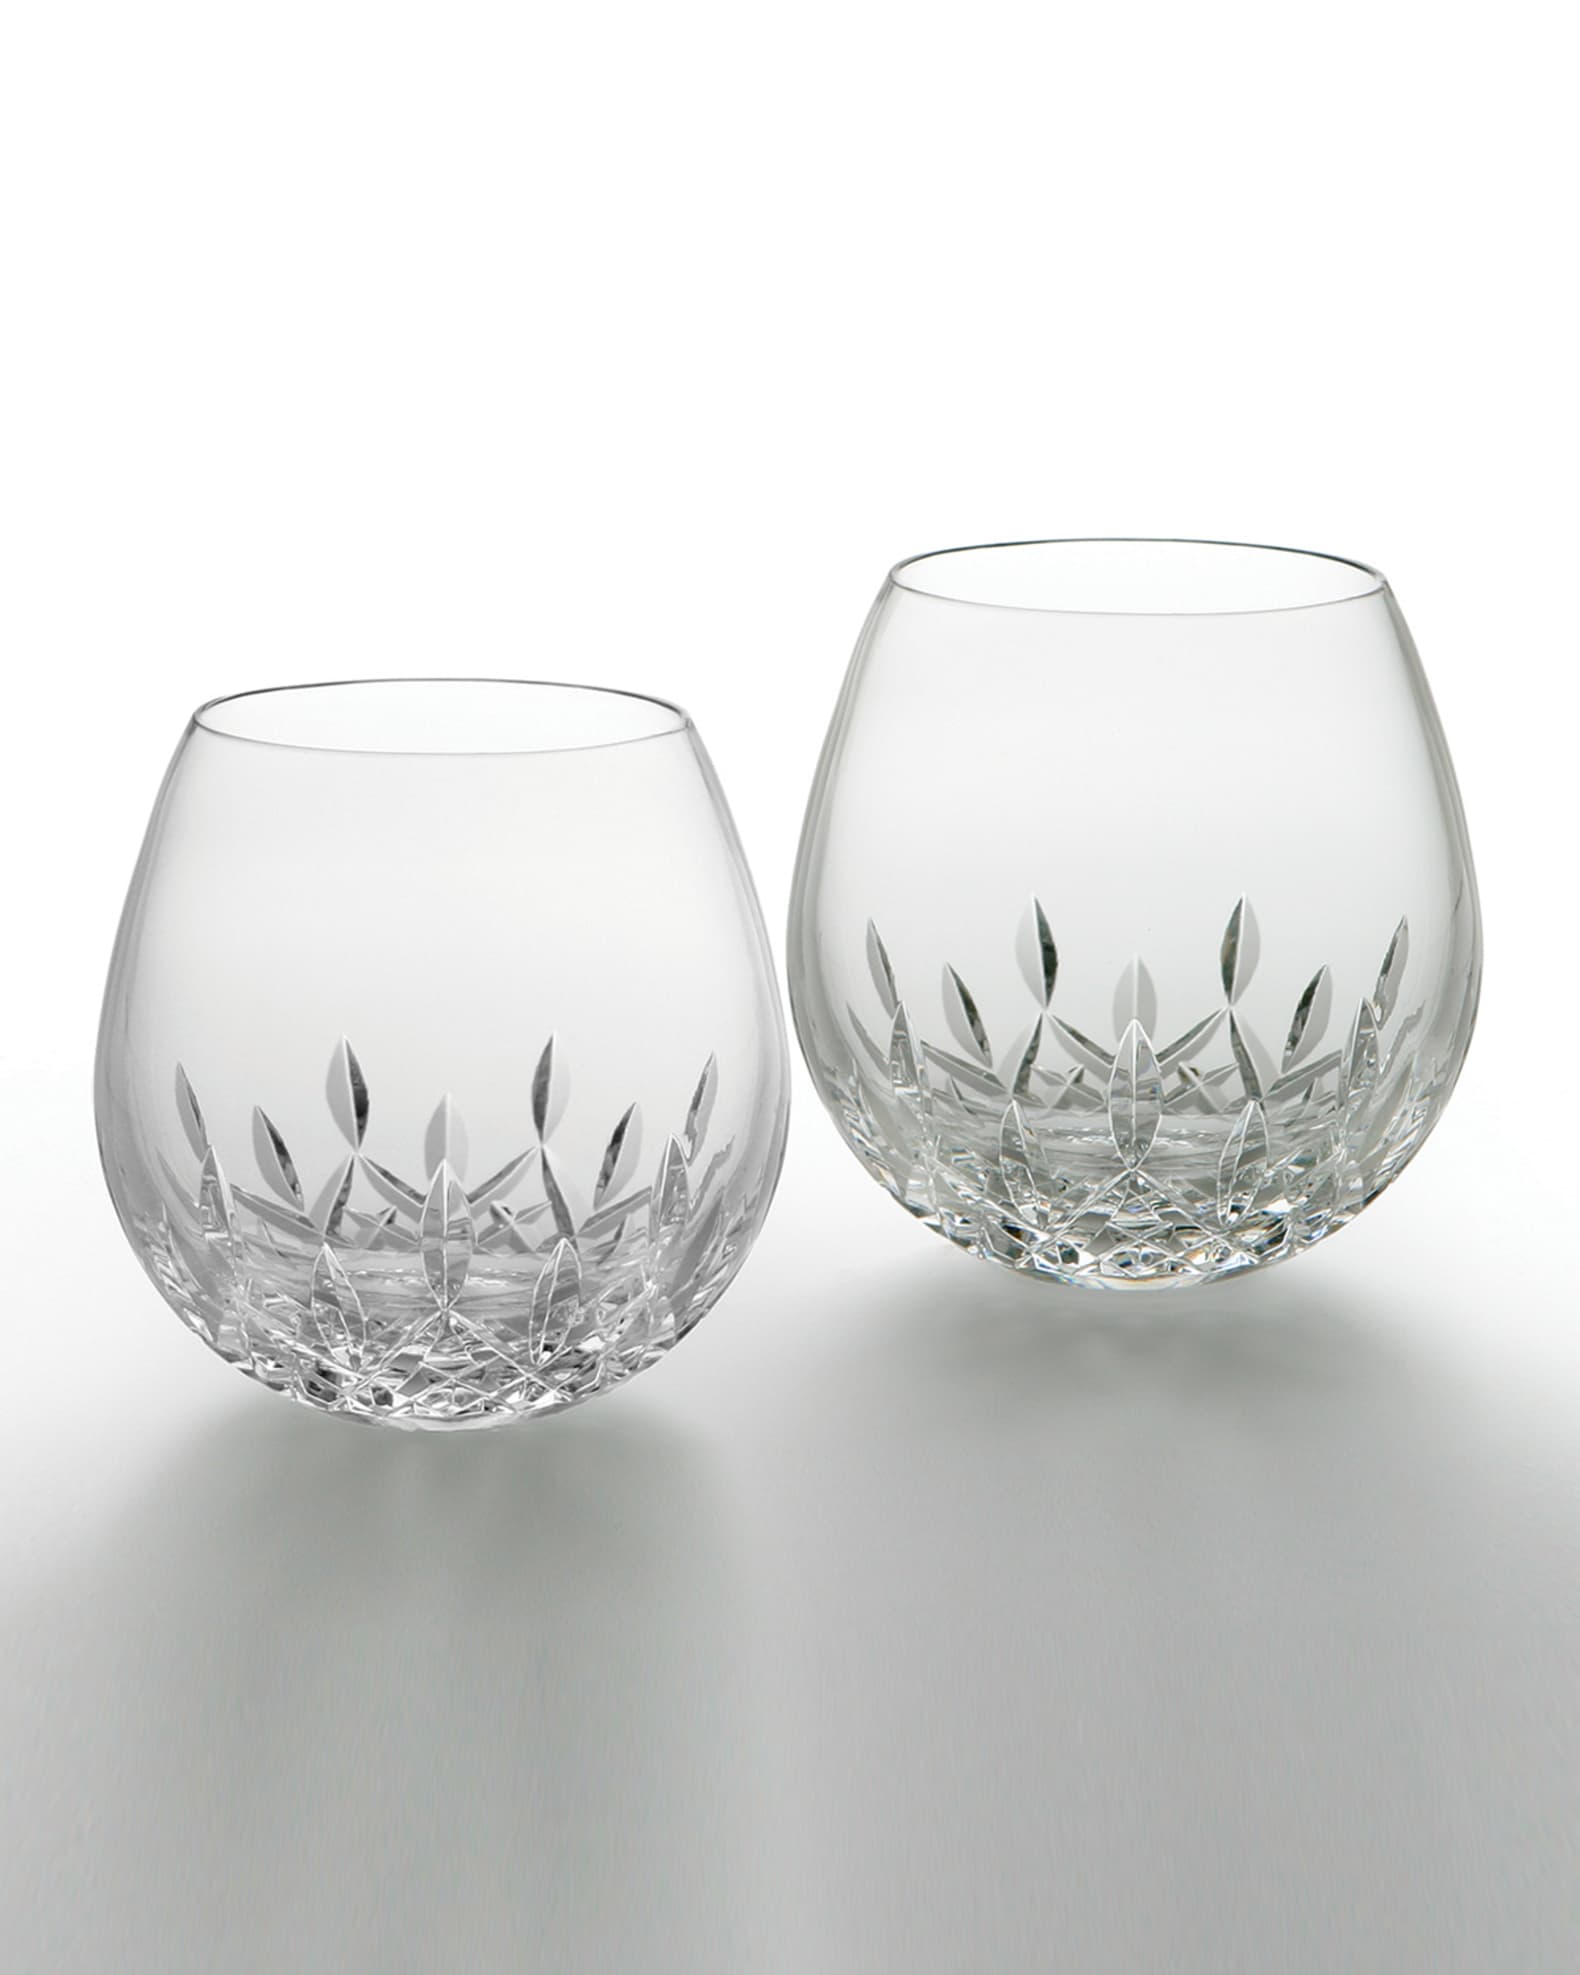 Waterford Lismore Essence Stemless White Wine, Set of 2